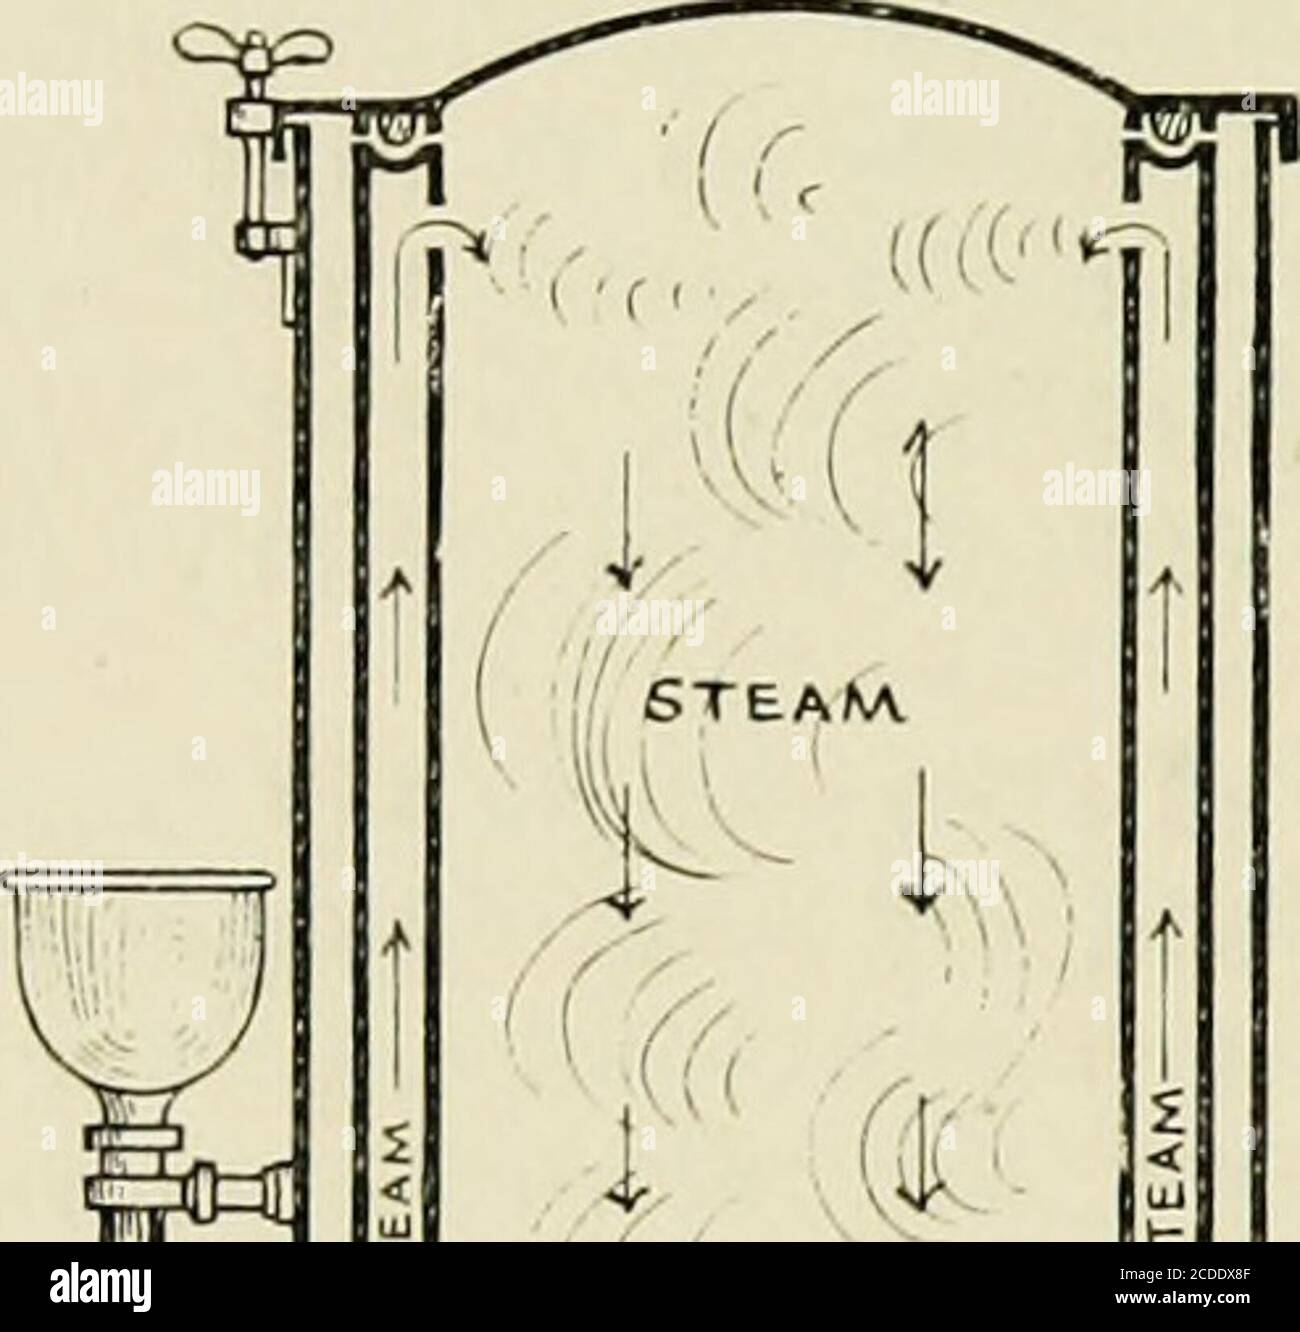 . The practice of anæsthetics . pper, or nickel plated,and should be heated by steam coils arranged alongthe bottom and sides. Two or three trays for instru-ments should be provided—the sterilizer being madedeep enough to hold all three trays at once if neces-sary. A modern form of sterilizer has a water-jacketabove the level of the water in the sterilizer, in whicha stream of cold water is kept circulating. Thiscondenses the steam which ordinarily puffs out in agreat cloud when the lid of the sterilizer is raised.This arrangement is unnecessary when the ventilationof the sterilizing room is w Stock Photo